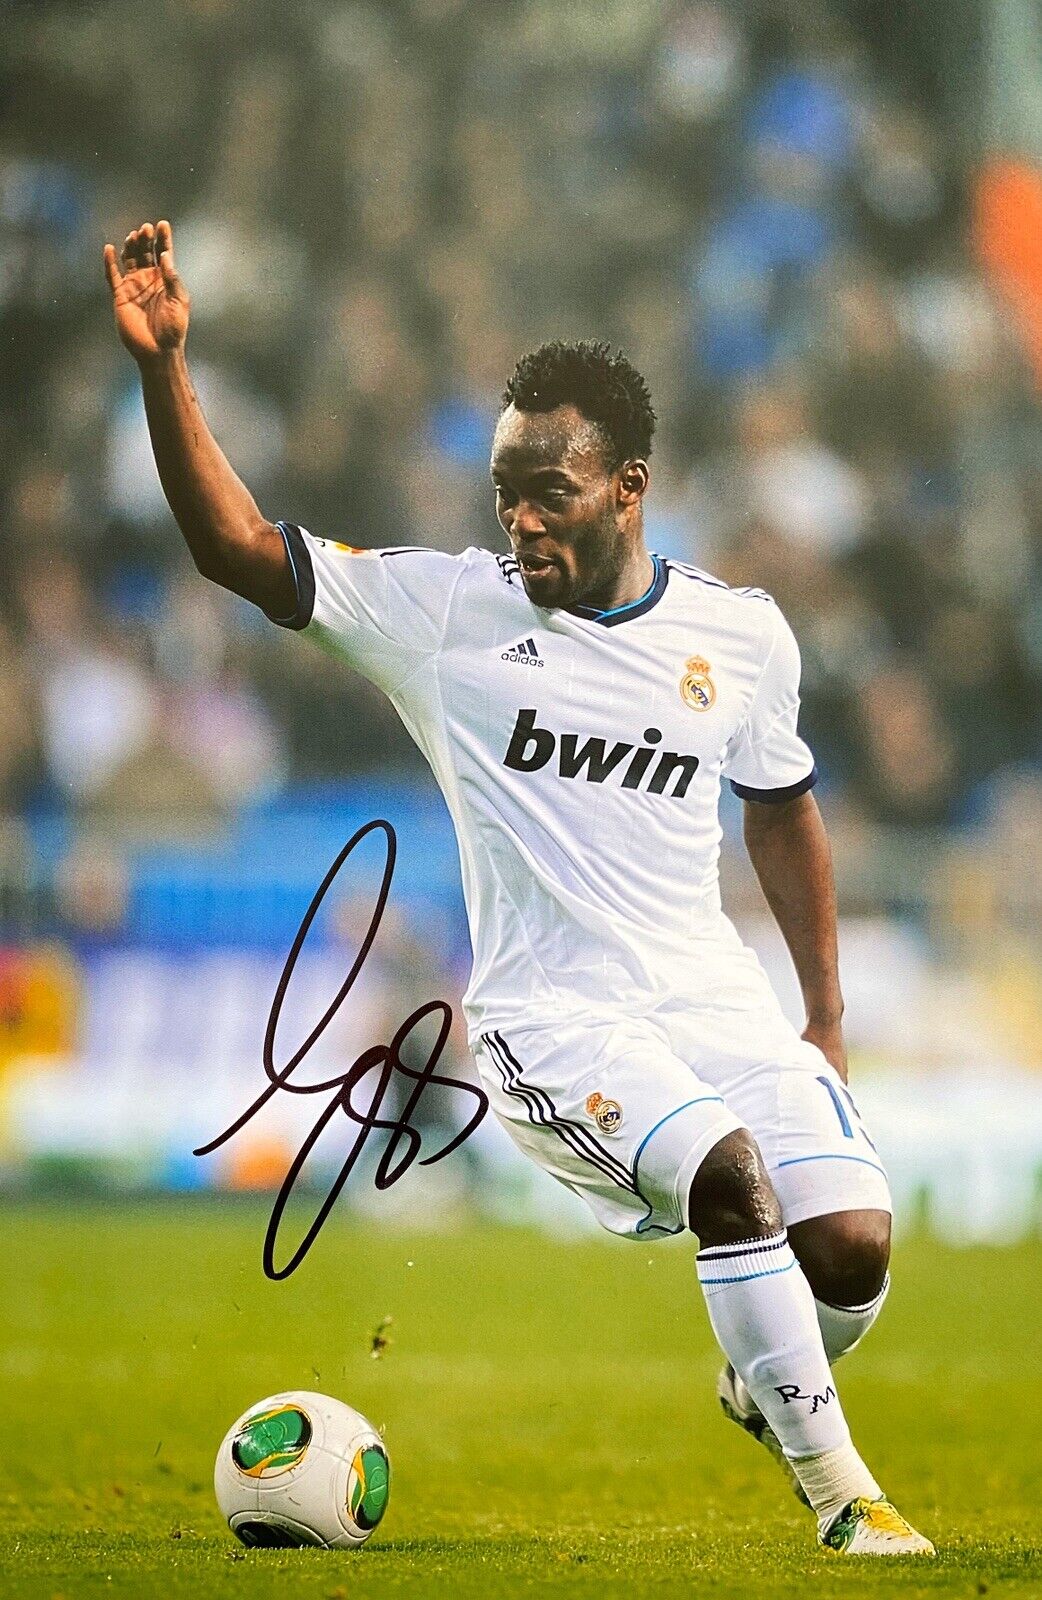 Michael Essien Hand Signed 12x8 Real Madrid Photo Poster painting, Chelsea, Ghana, View Proof